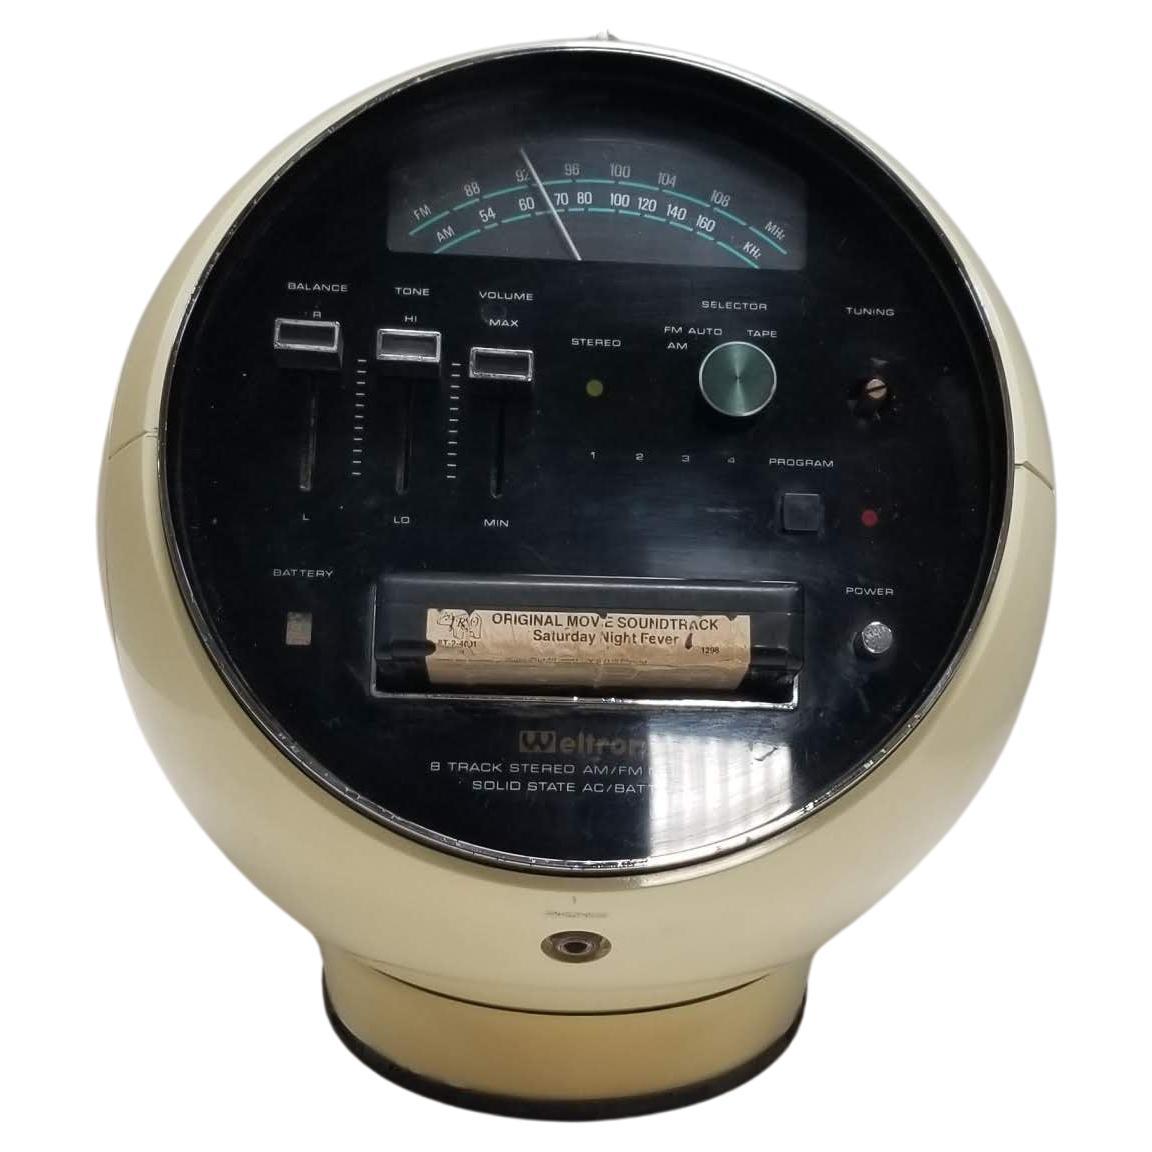 Weltron Model 2001 Space Ball, AM/FM Radio 8 Track Stereo For Sale